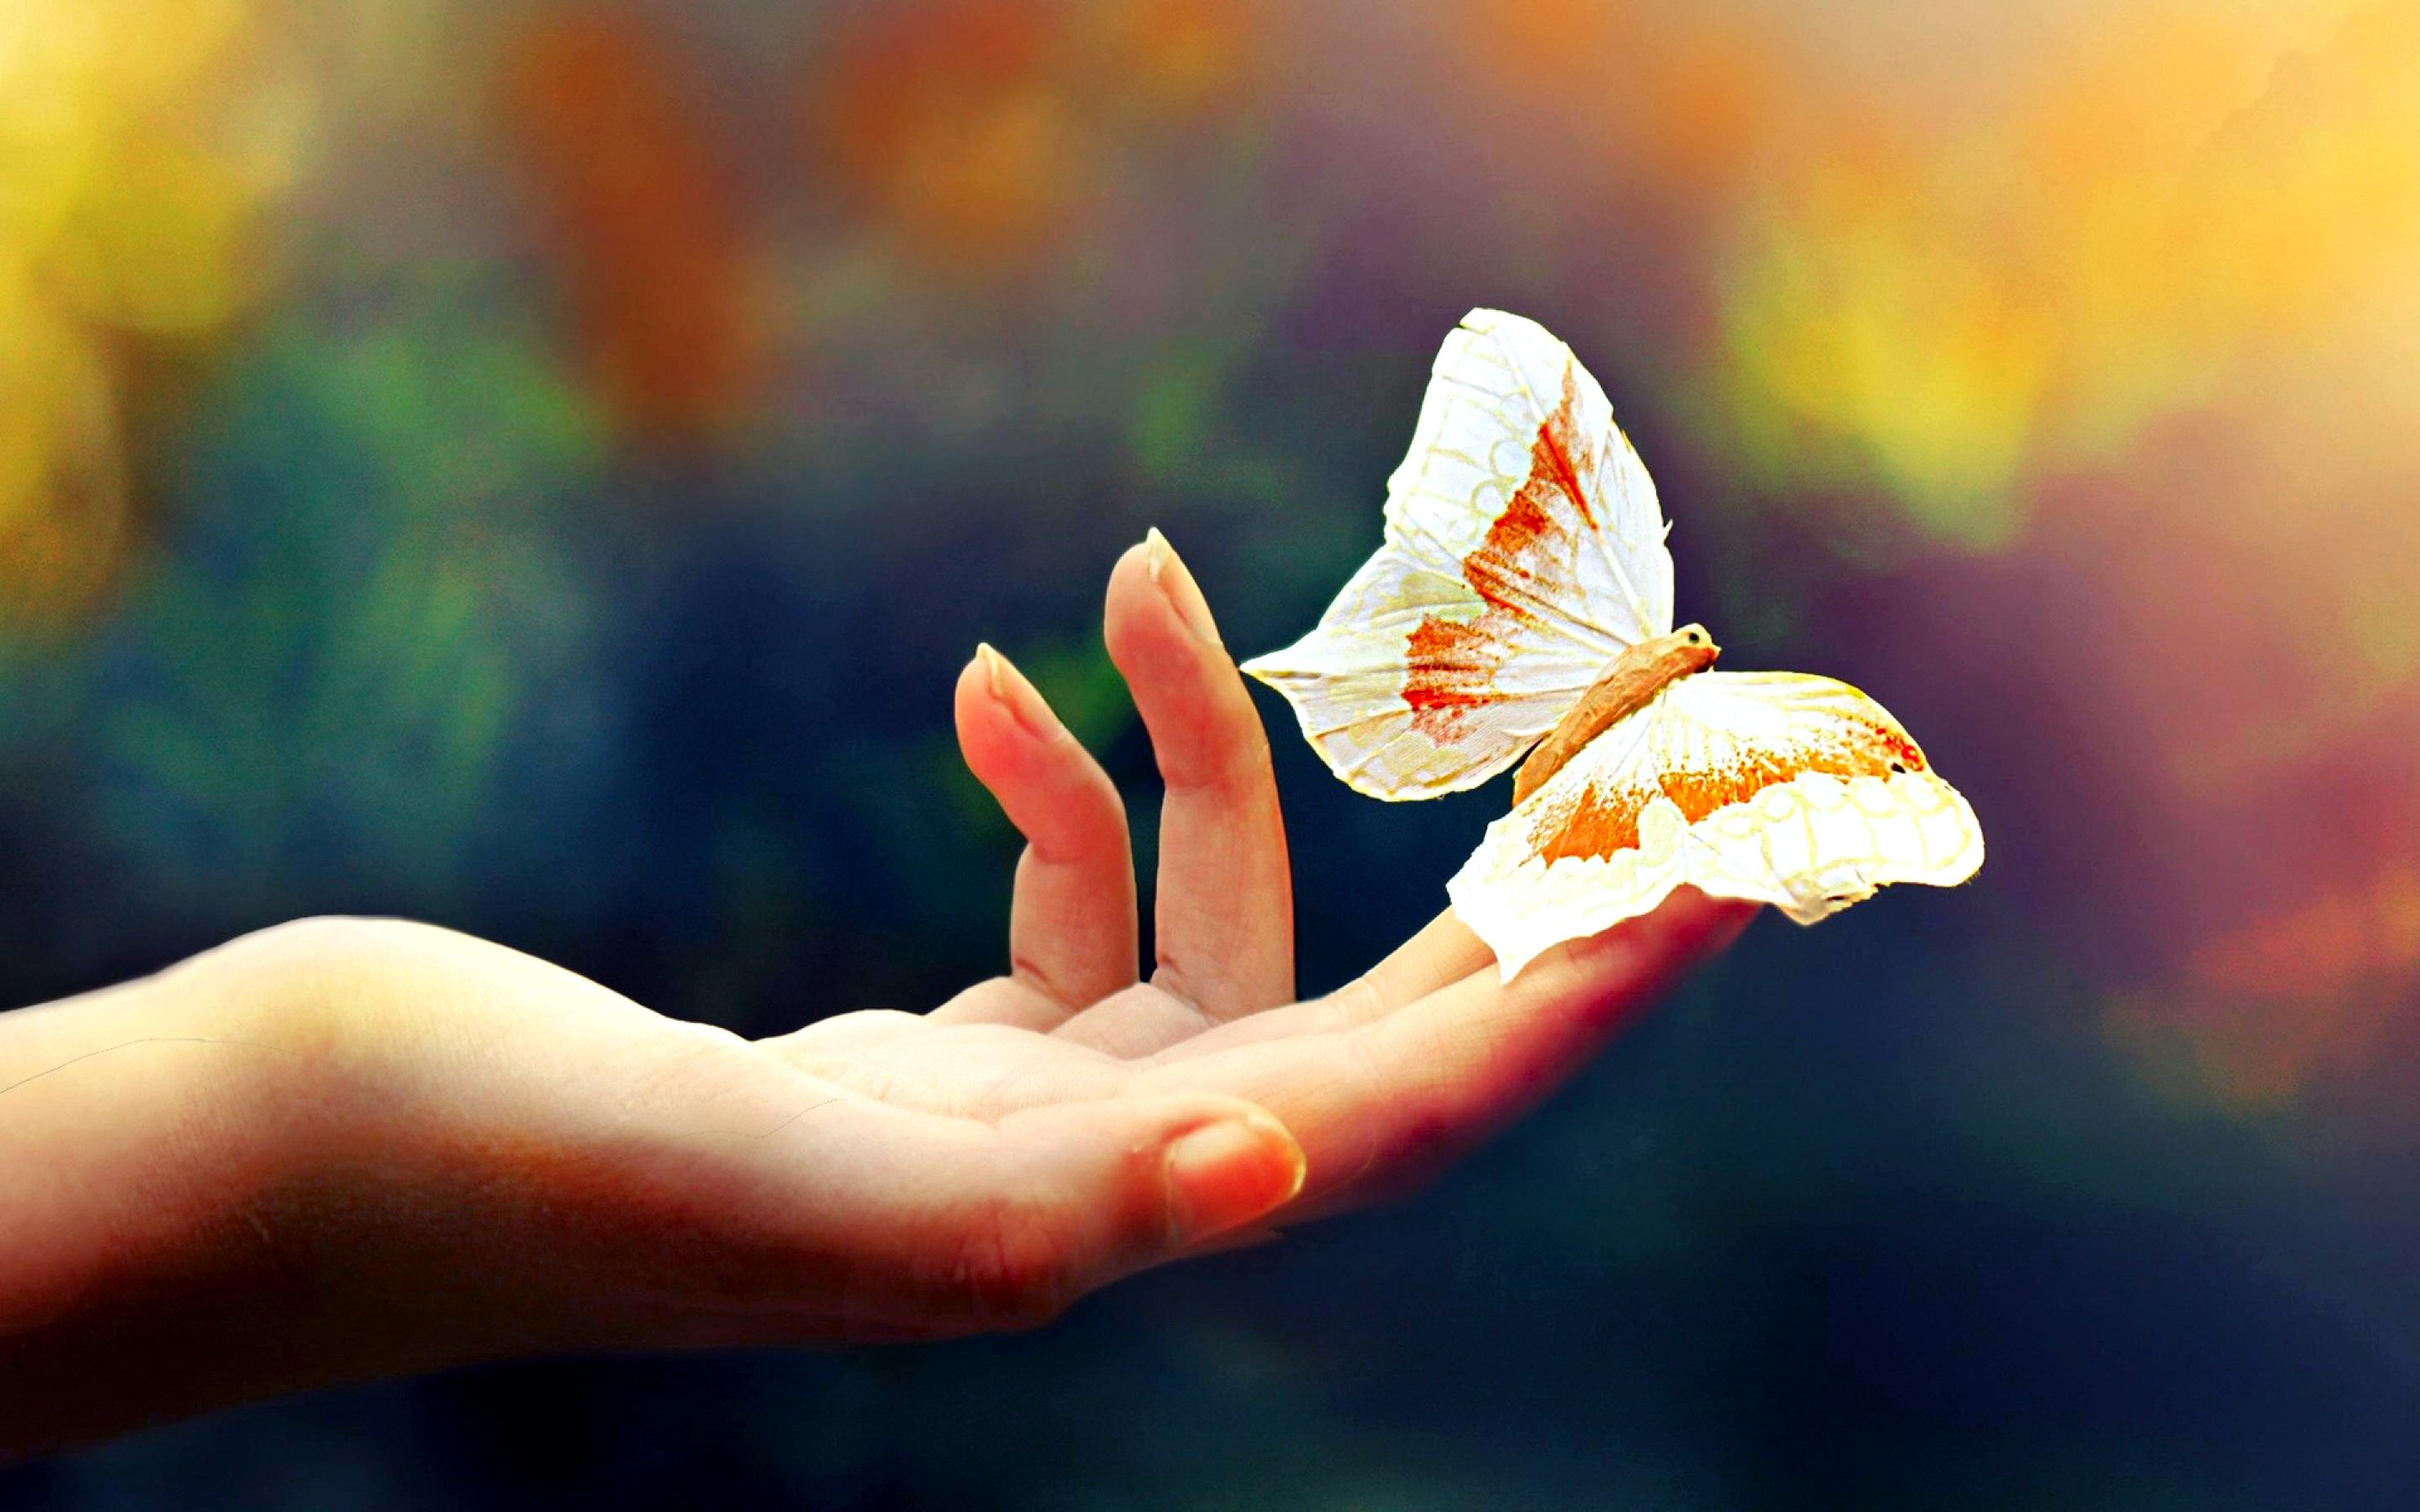 [22+] Butterfly In Hand Wallpapers on WallpaperSafari